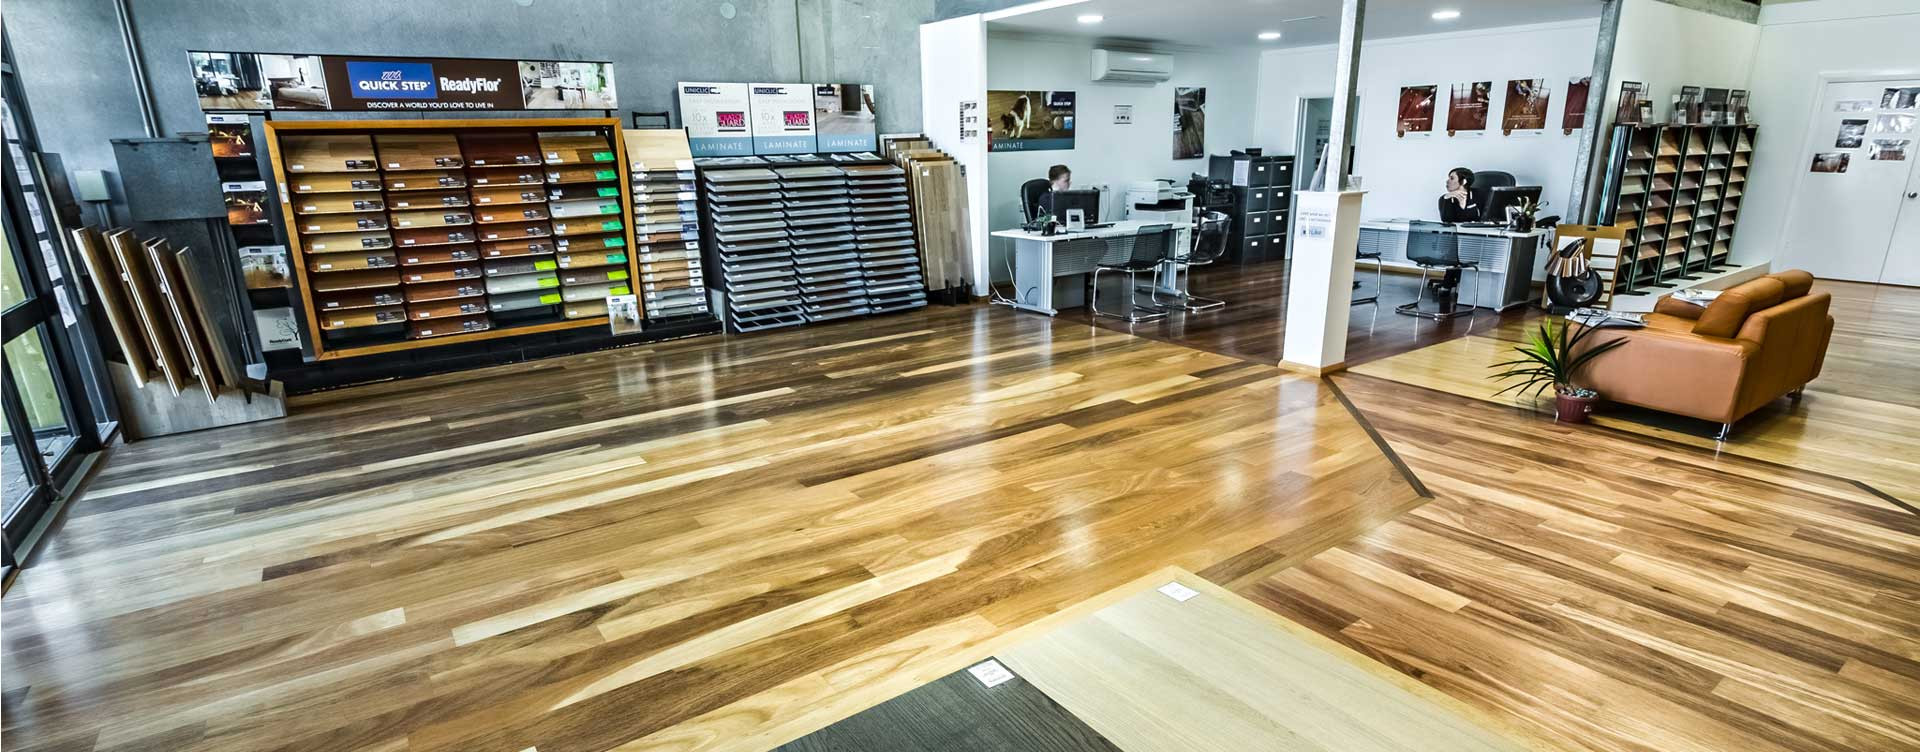 Can You Glue Down Hardwood Flooring Of Timber Flooring Perth Coastal Flooring Wa Quality Wooden Inside thats why they Call Us the Home Of Fine Wood Floors